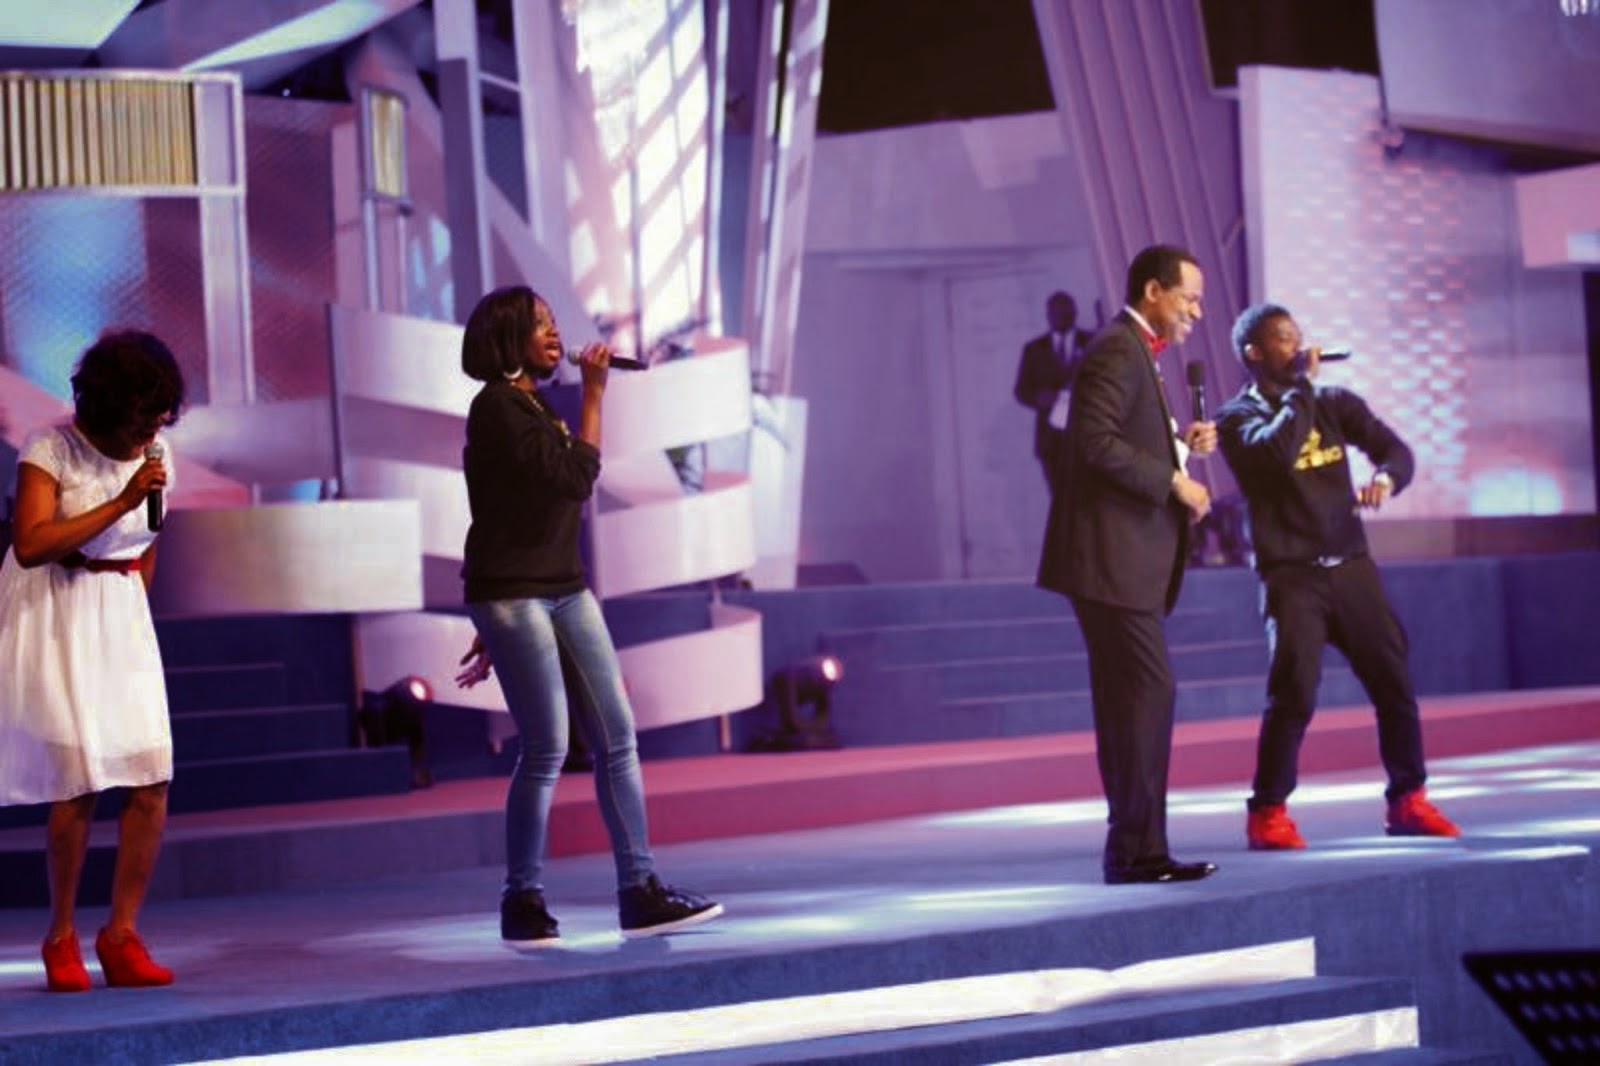 Chris Oyakhilome and daughter perform on stage